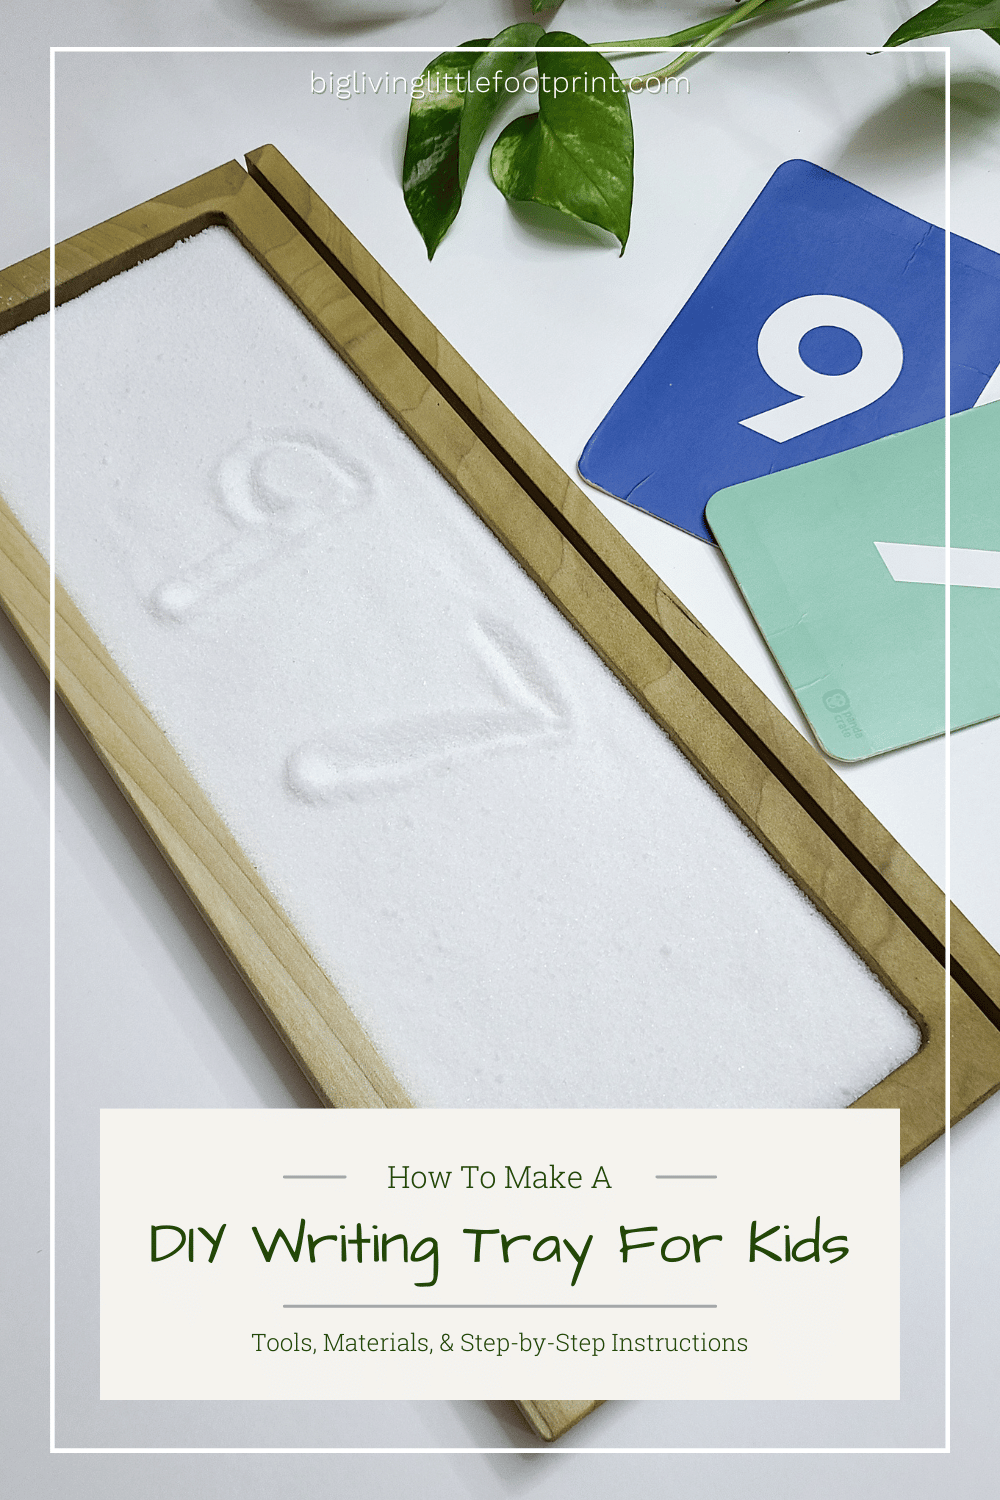 How To Make A DIY Writing Tray For Kids